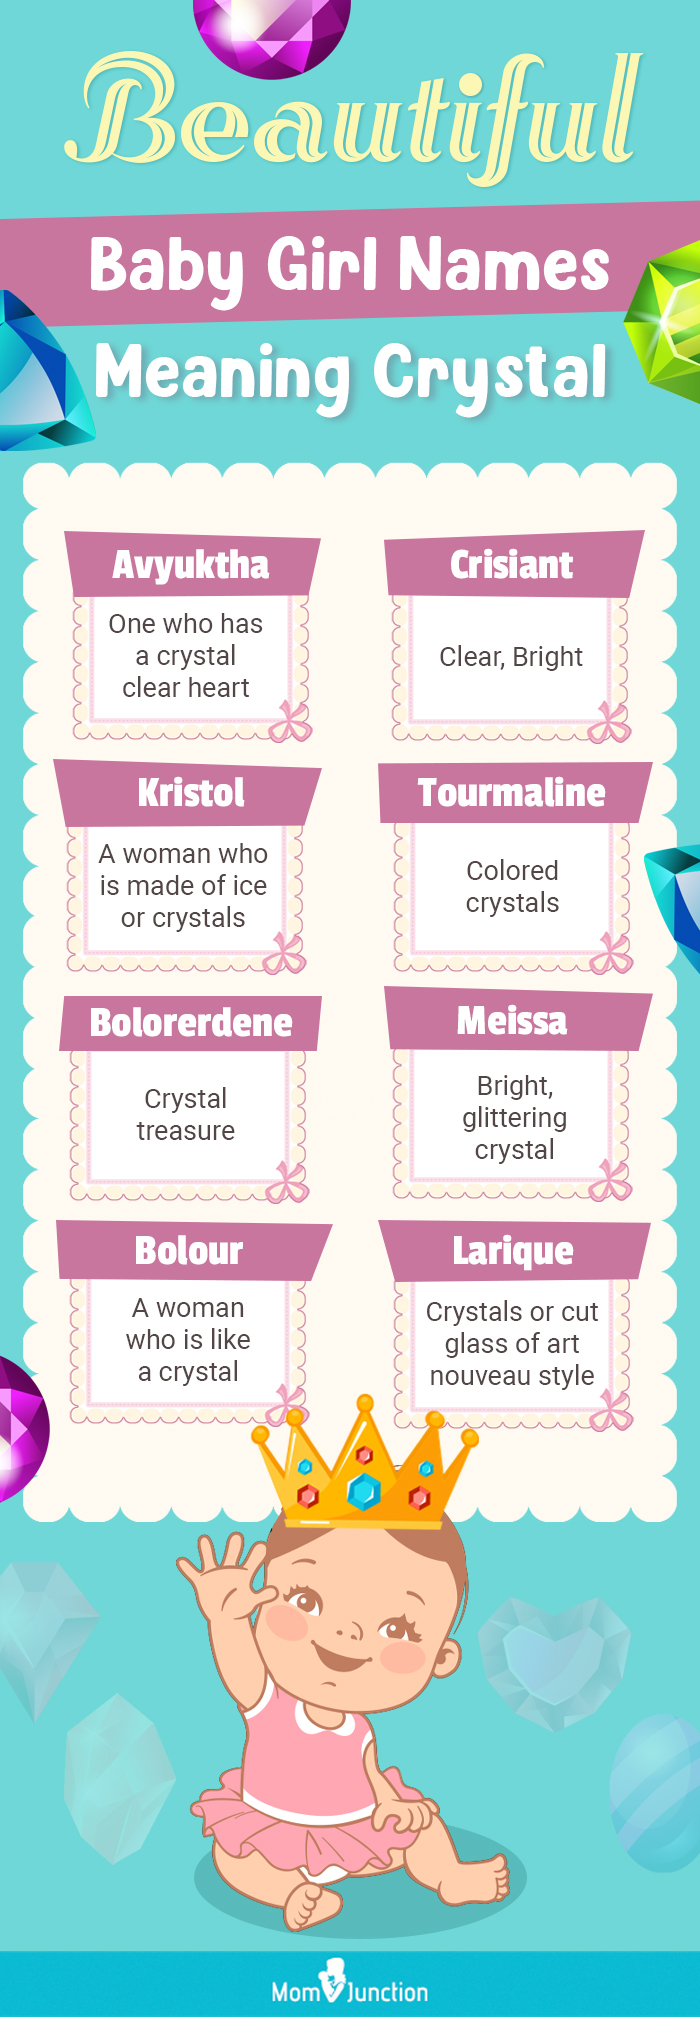 Noble Beautiful Baby Girl Names Meaning Crystal (infographic)